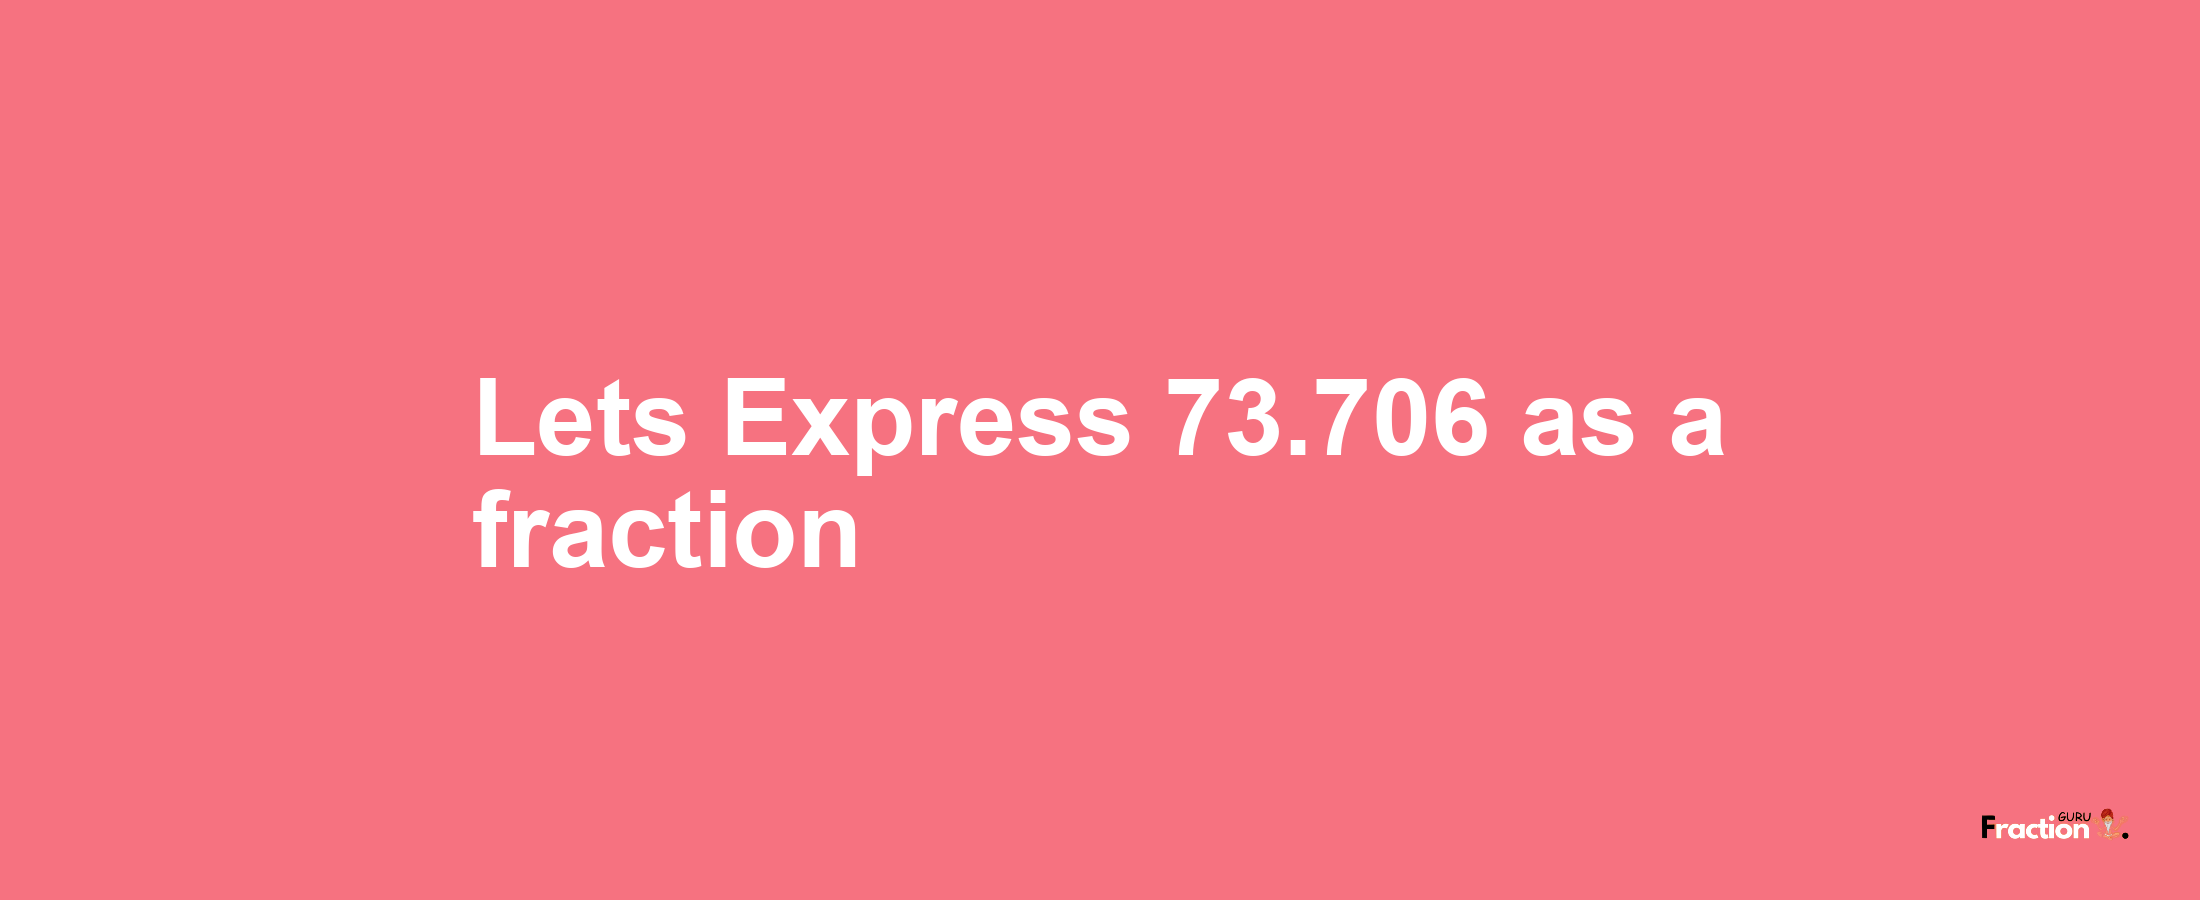 Lets Express 73.706 as afraction